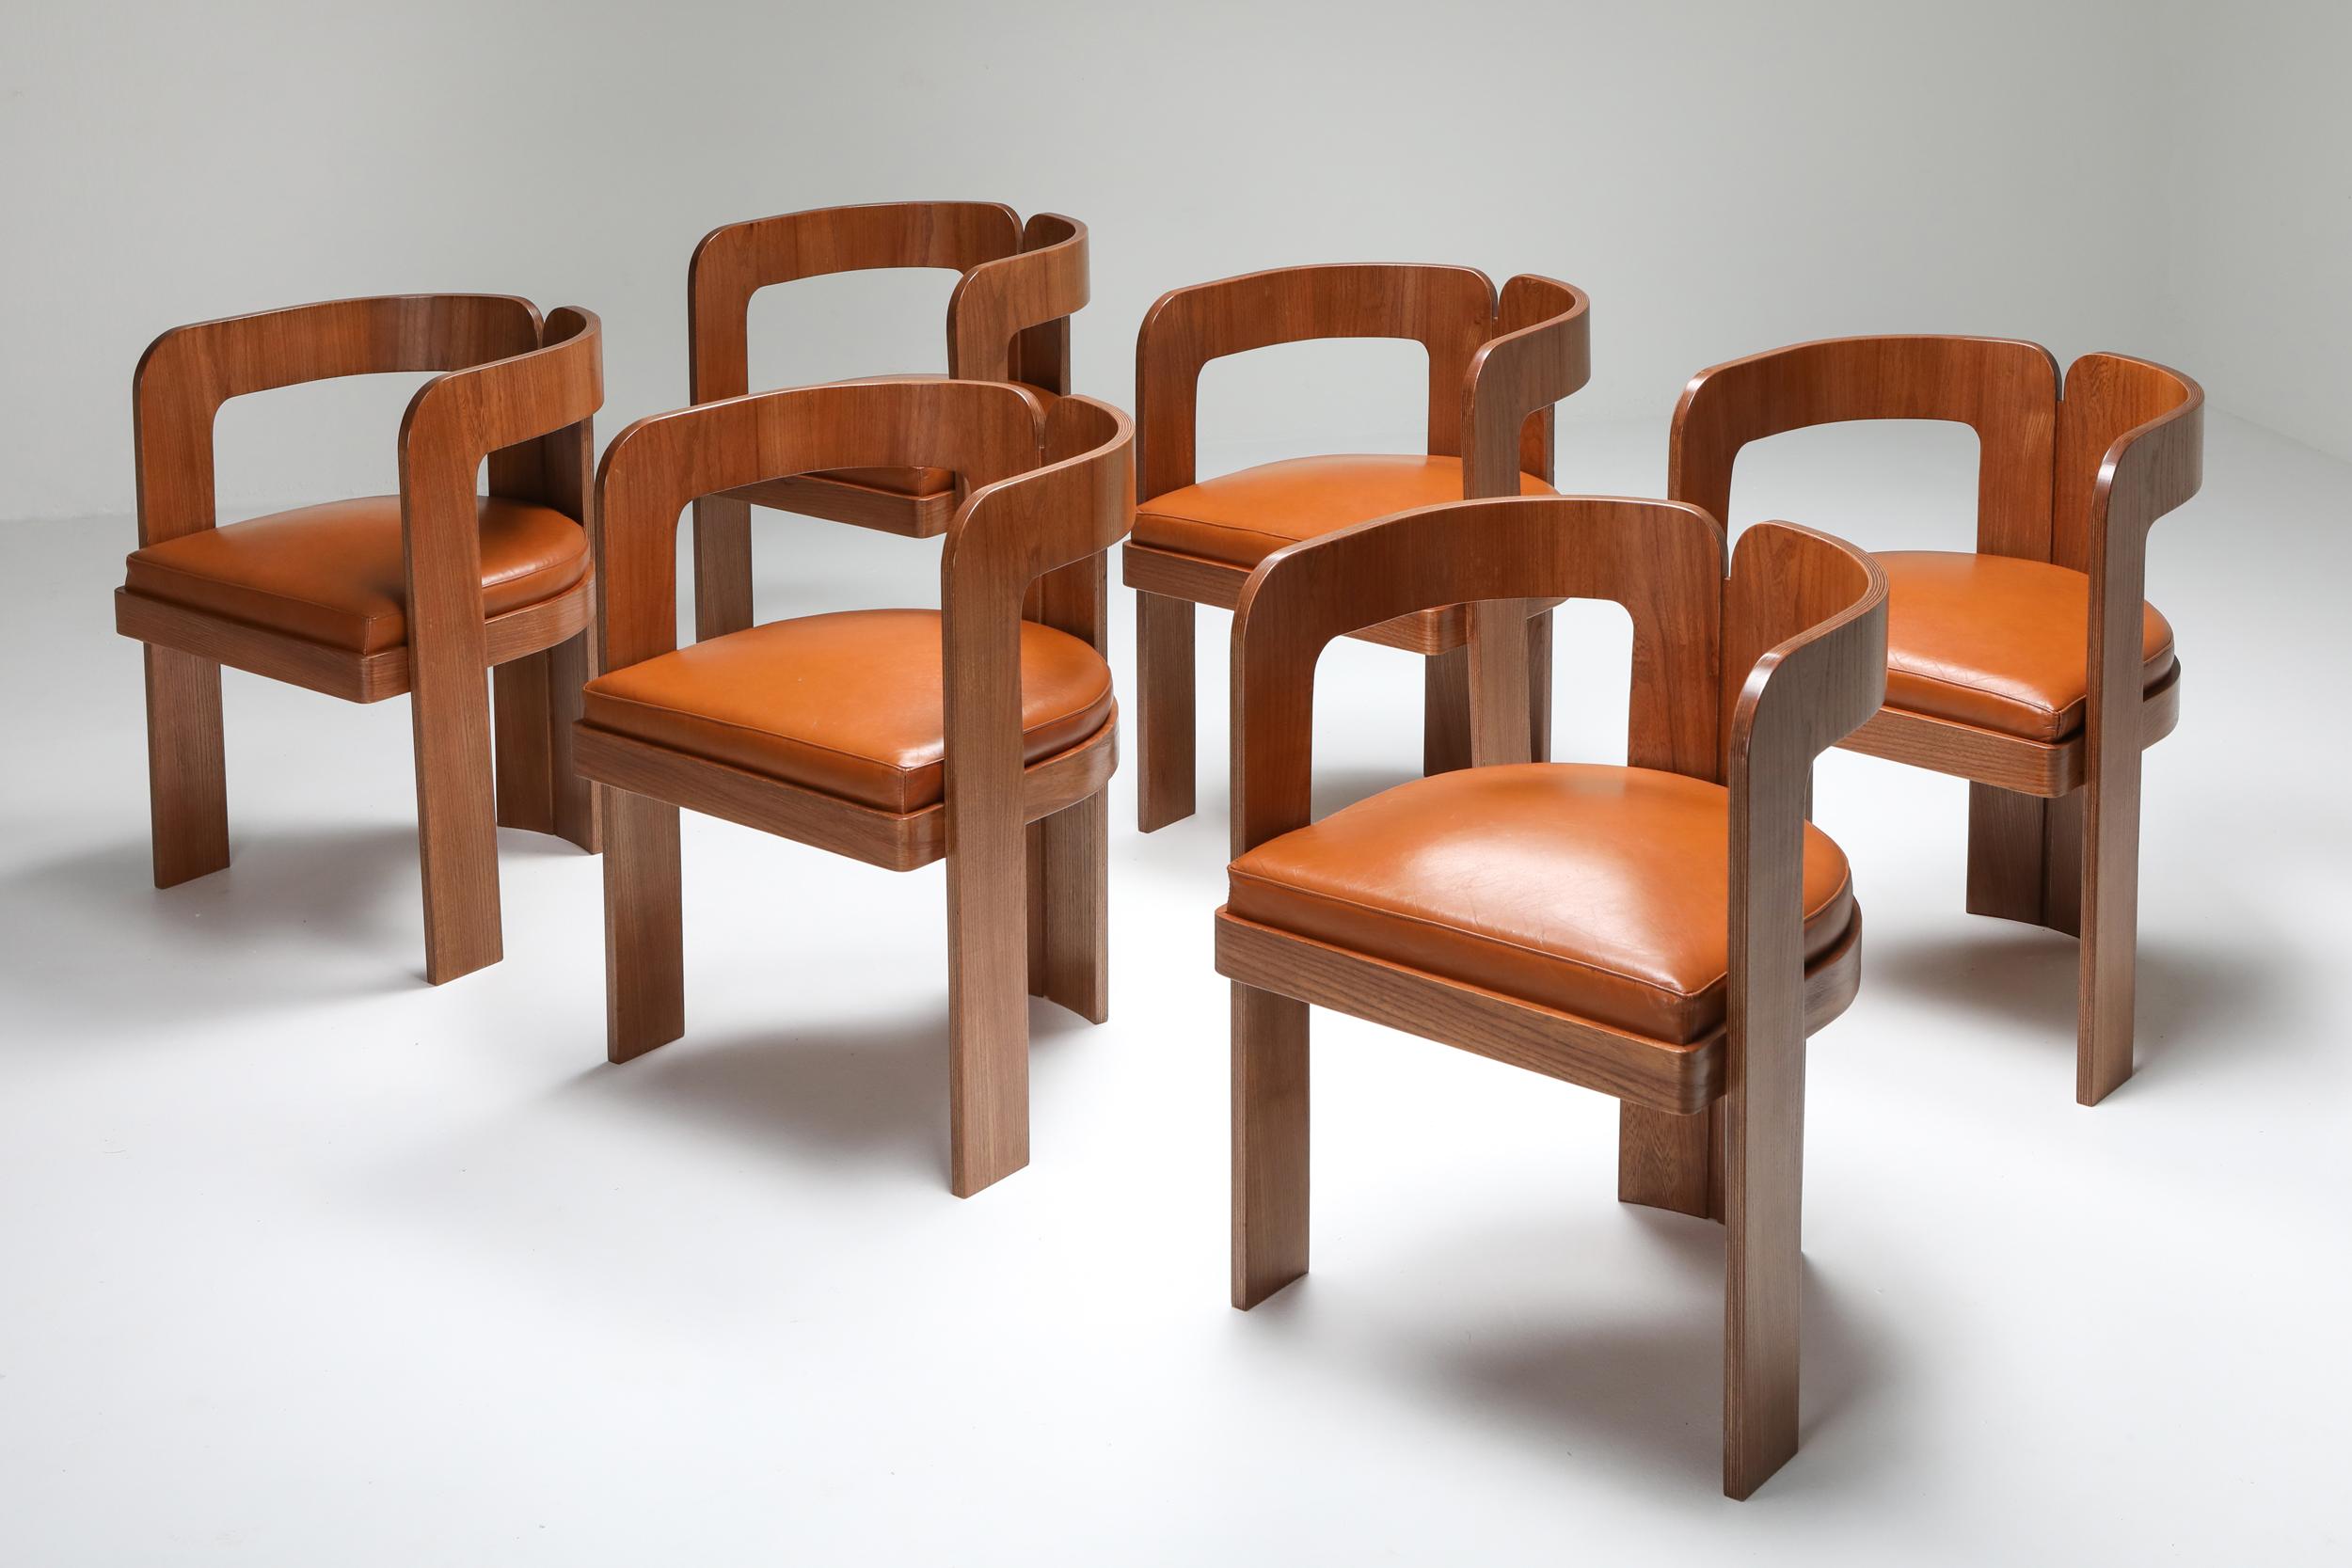 Postmodern dining chairs, by Marzio Cecchi, walnut, cognac leather

Bespoke set of armchair designed for a specific table and project.
Marzio Cecchi was interior designer, architect, furniture designer, and artist.
He made everything custom for